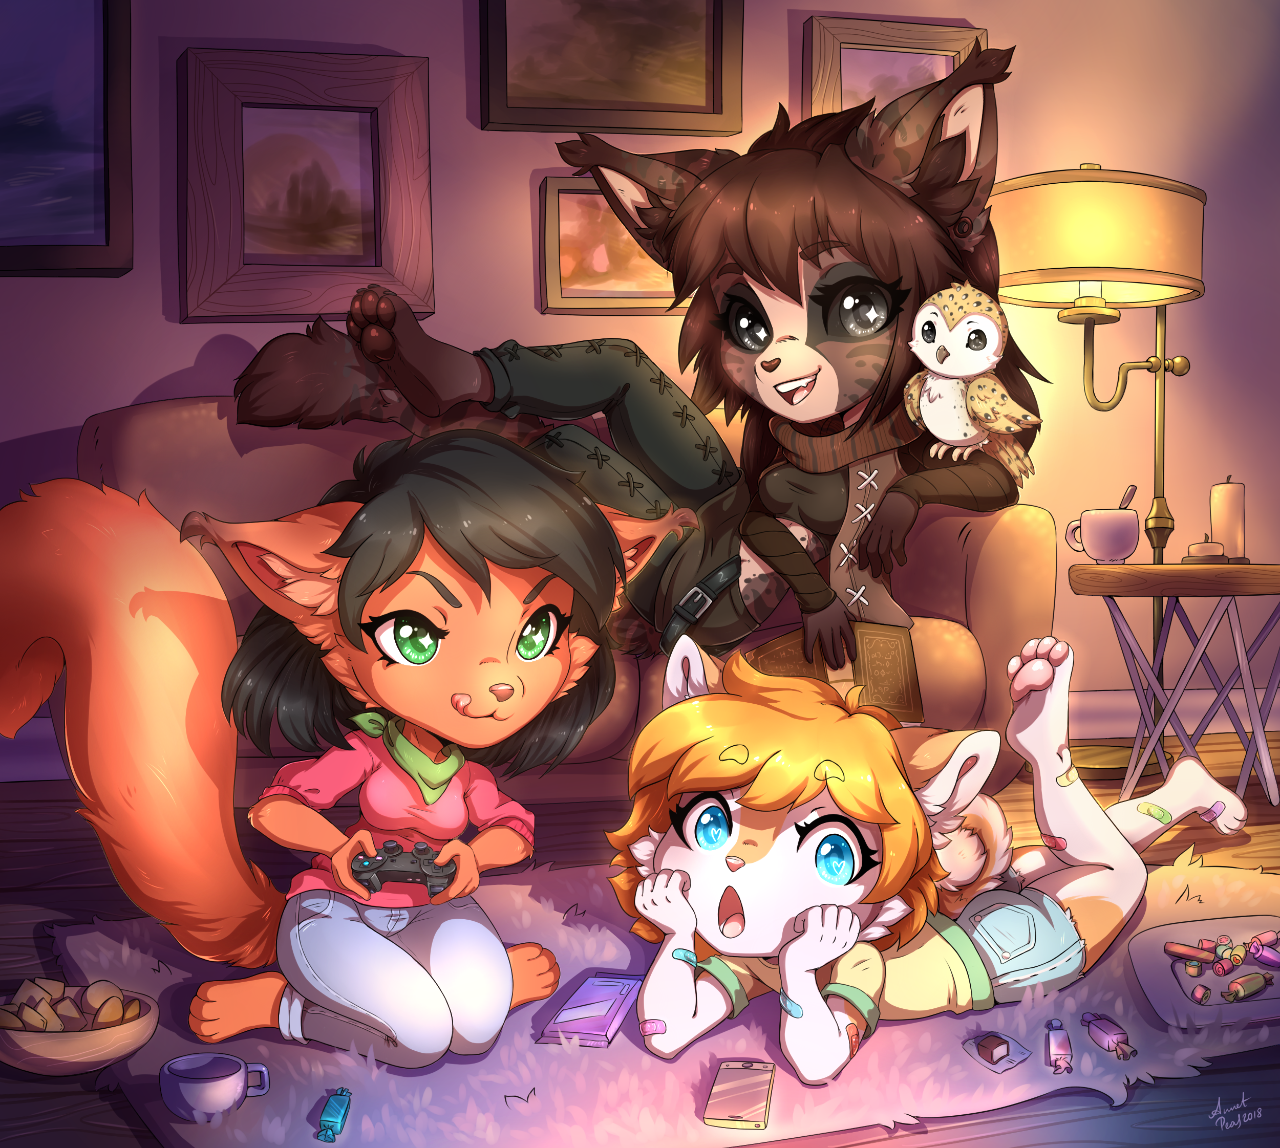 Vacation with friends - Furry, Furry art, Chibi, 